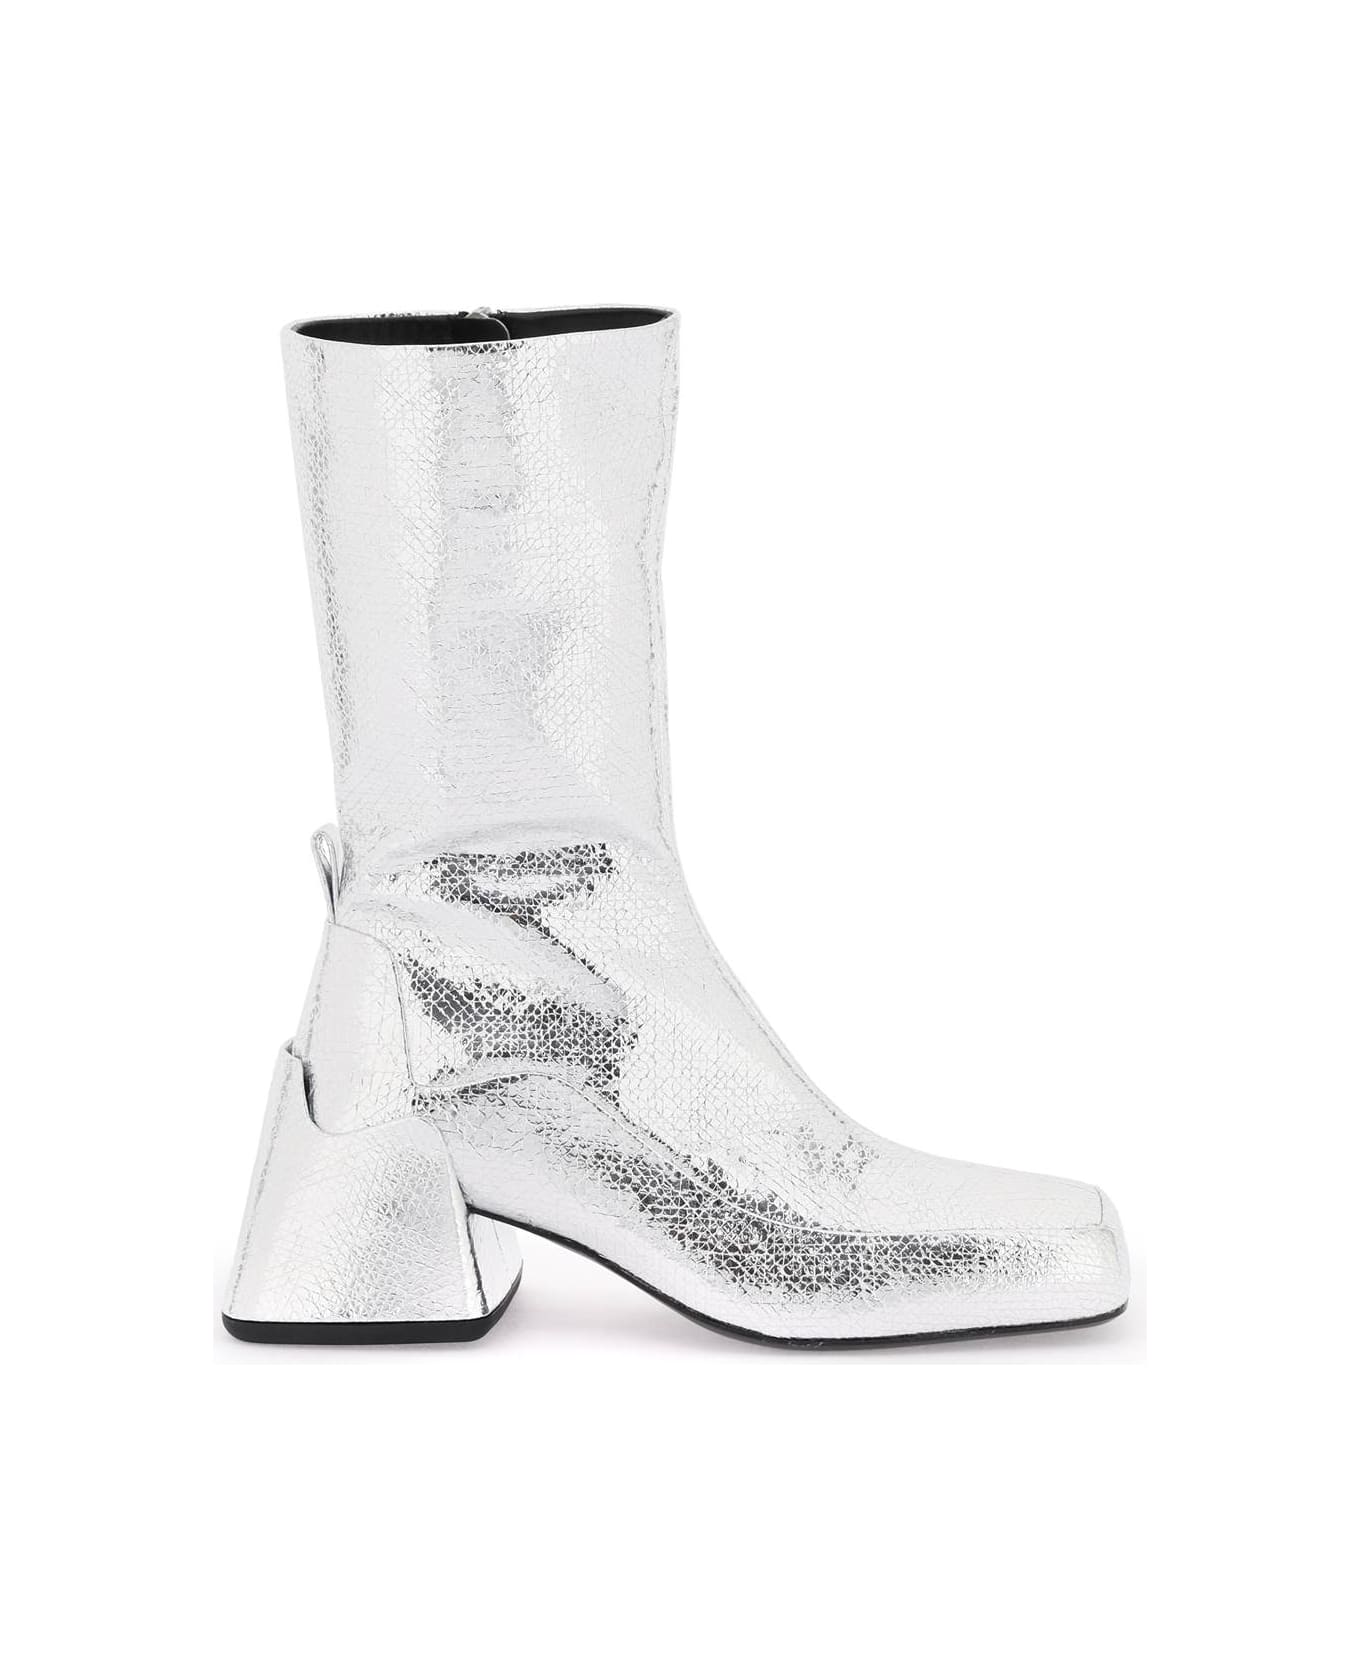 Jil Sander Cracked-effect Laminated Leather Boots - SILVER MOON (Silver)